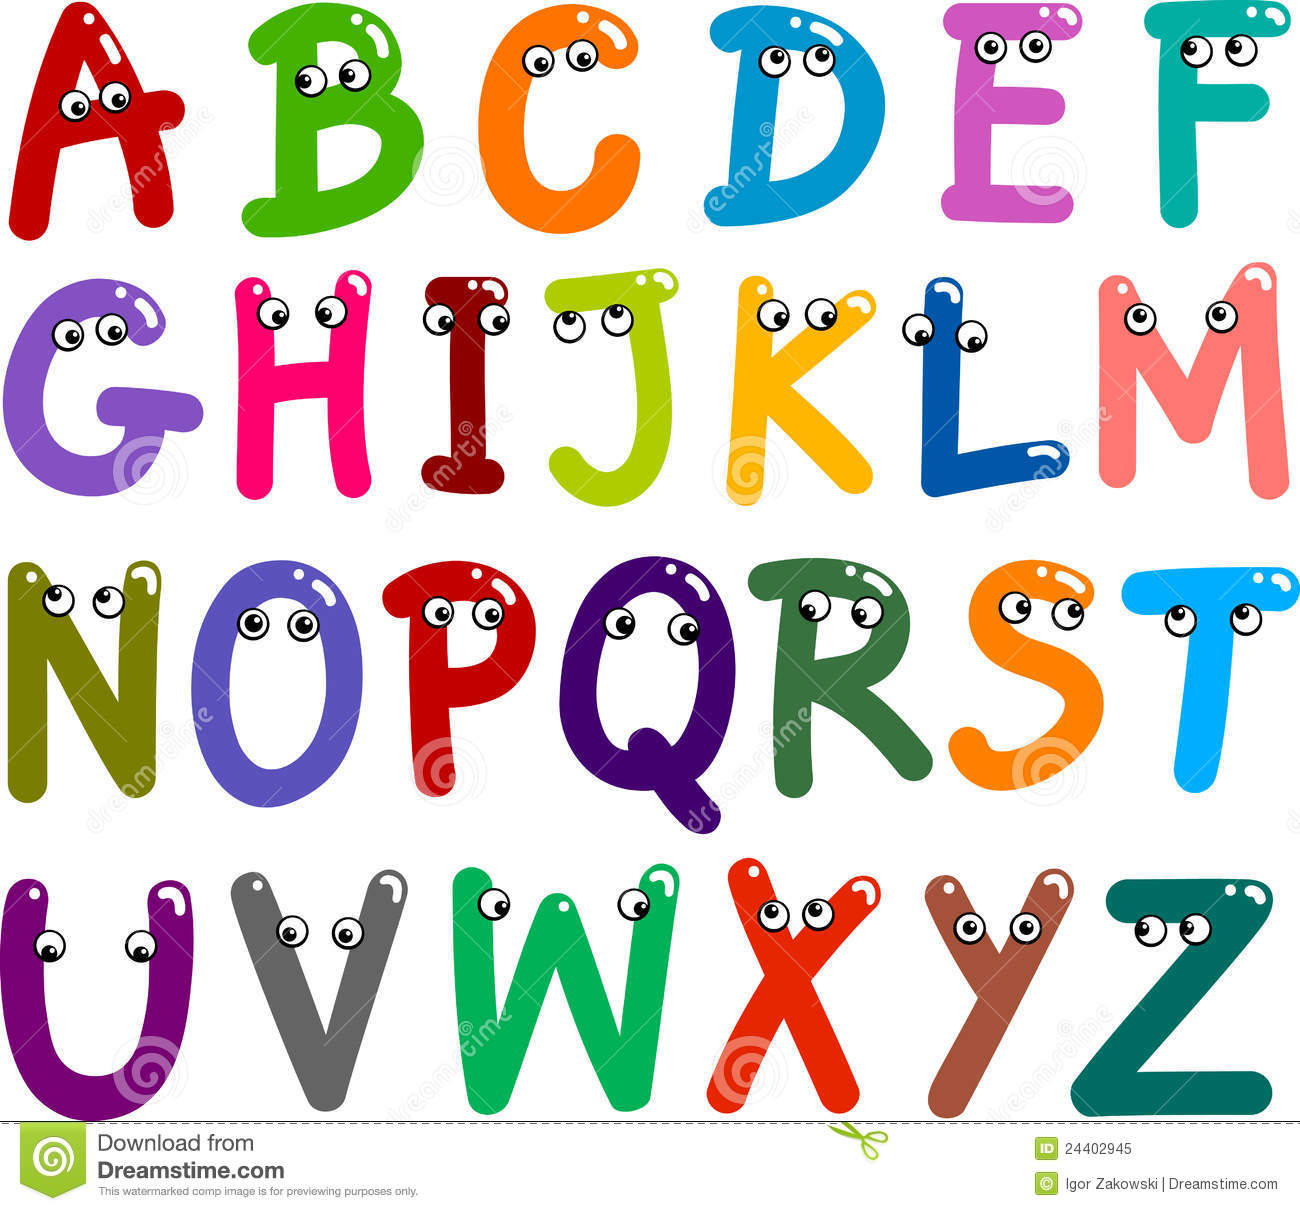 Funny Capital Letters Alphabet Royalty Free Stock Photo   Image